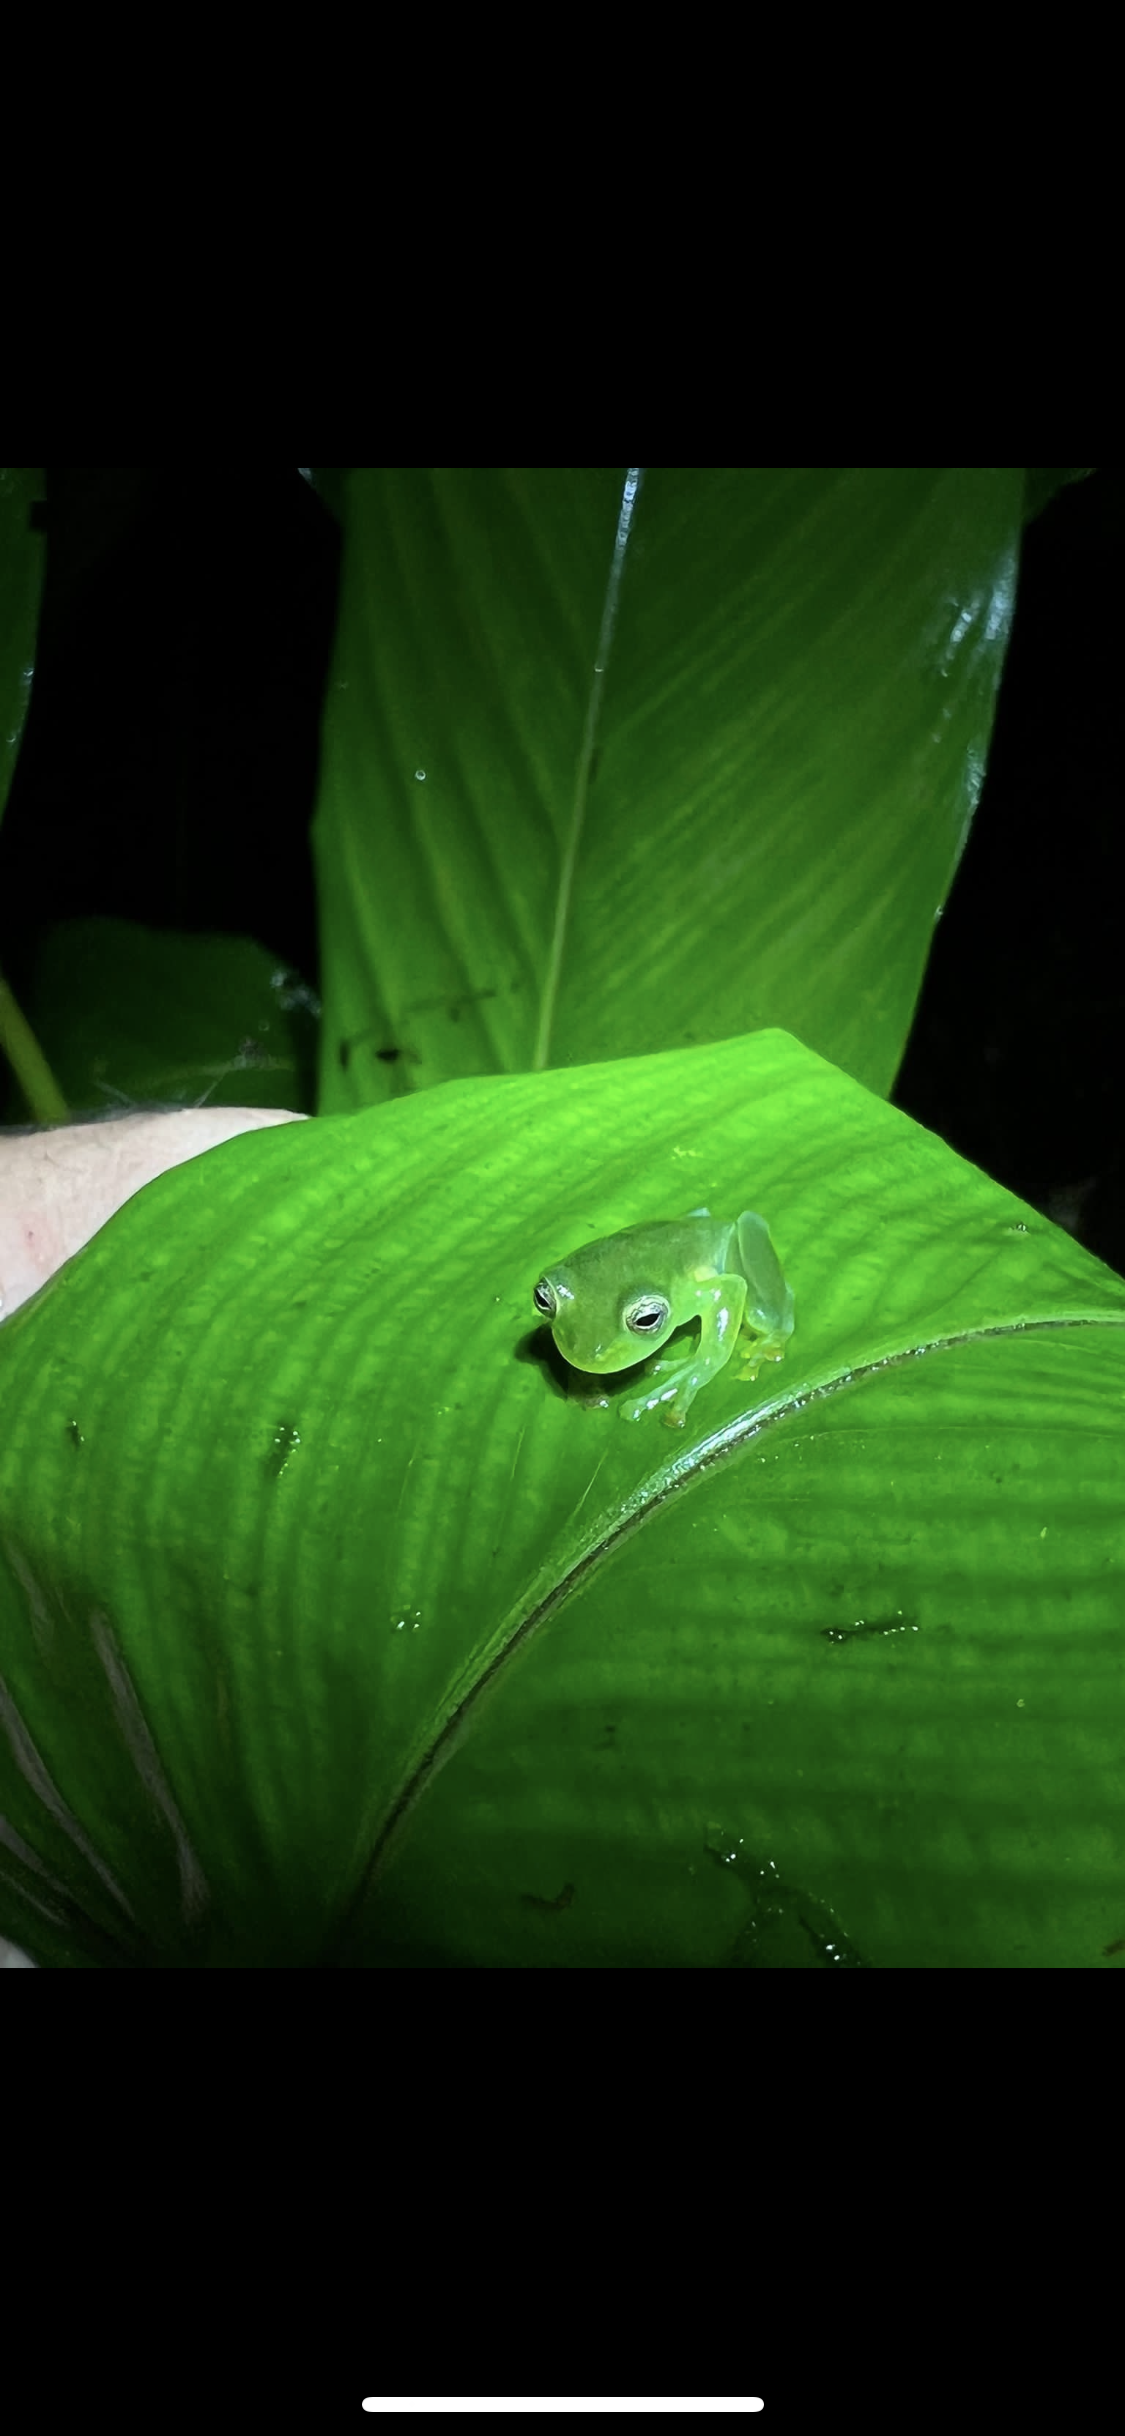 The coolest frog ever which I spotted while we hiked through Rio Celeste in search of sloths and tapirs (both of which we found!)